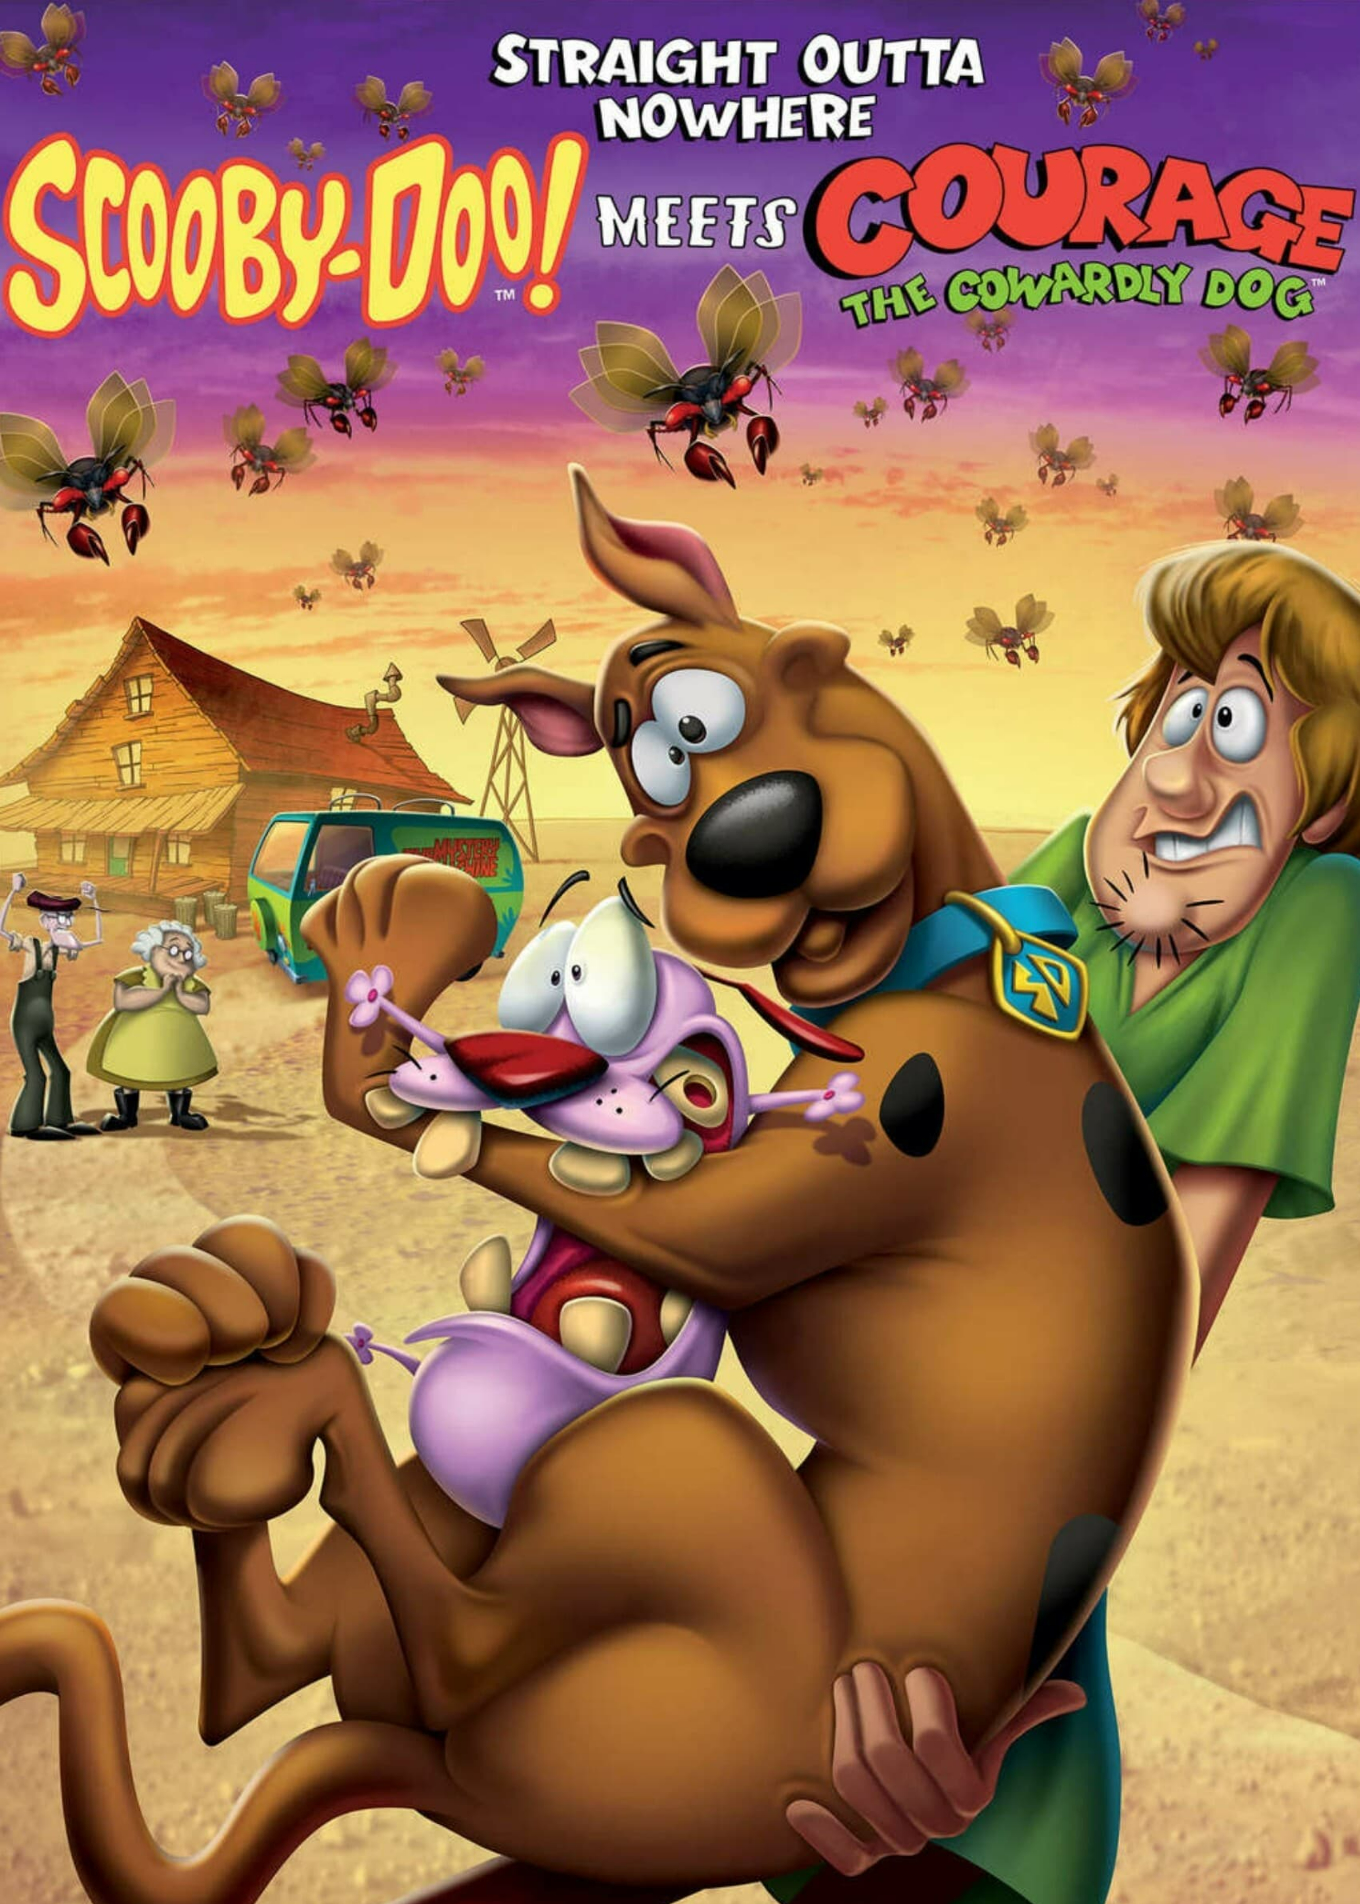 Straight Outta Nowhere: Scooby-Doo! Meets Courage the Cowardly Dog - Straight Outta Nowhere: Scooby-Doo! Meets Courage the Cowardly Dog (2021)